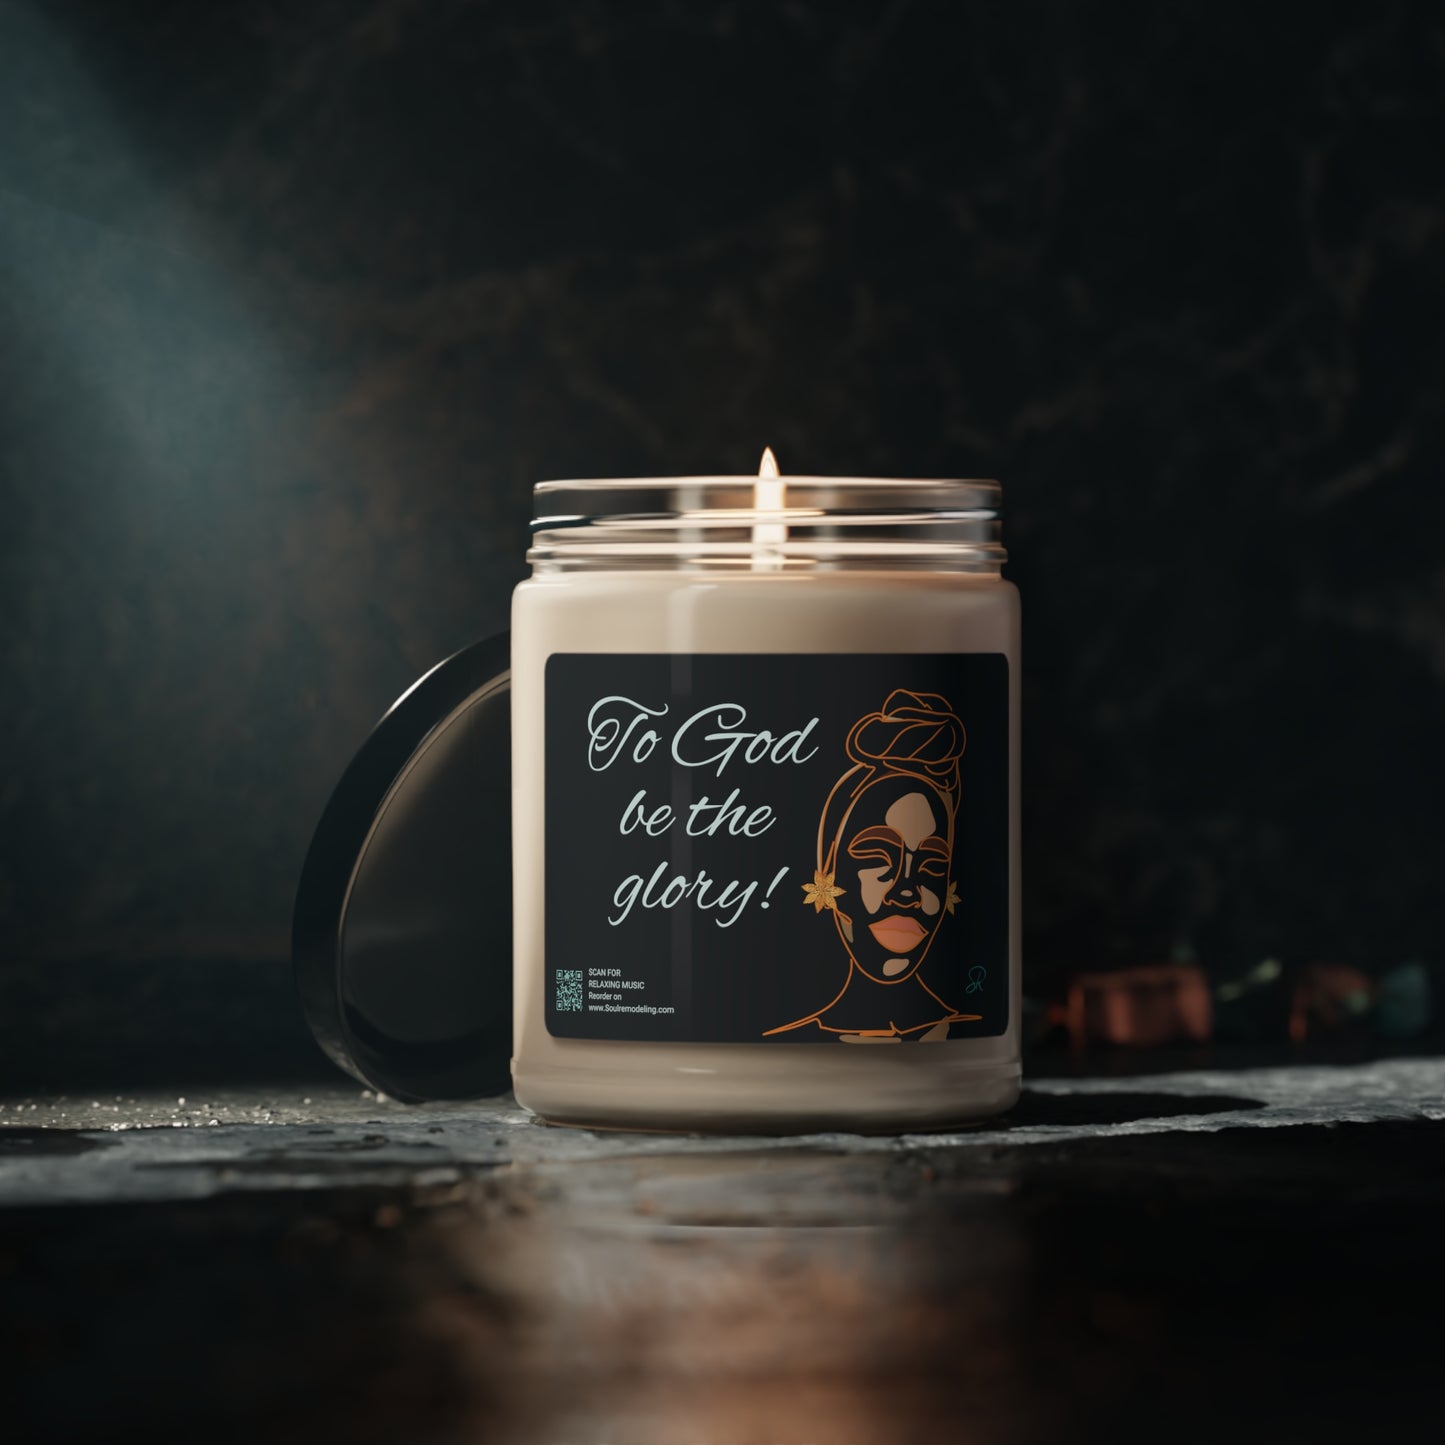 "To God be the glory!" Candle, 9oz